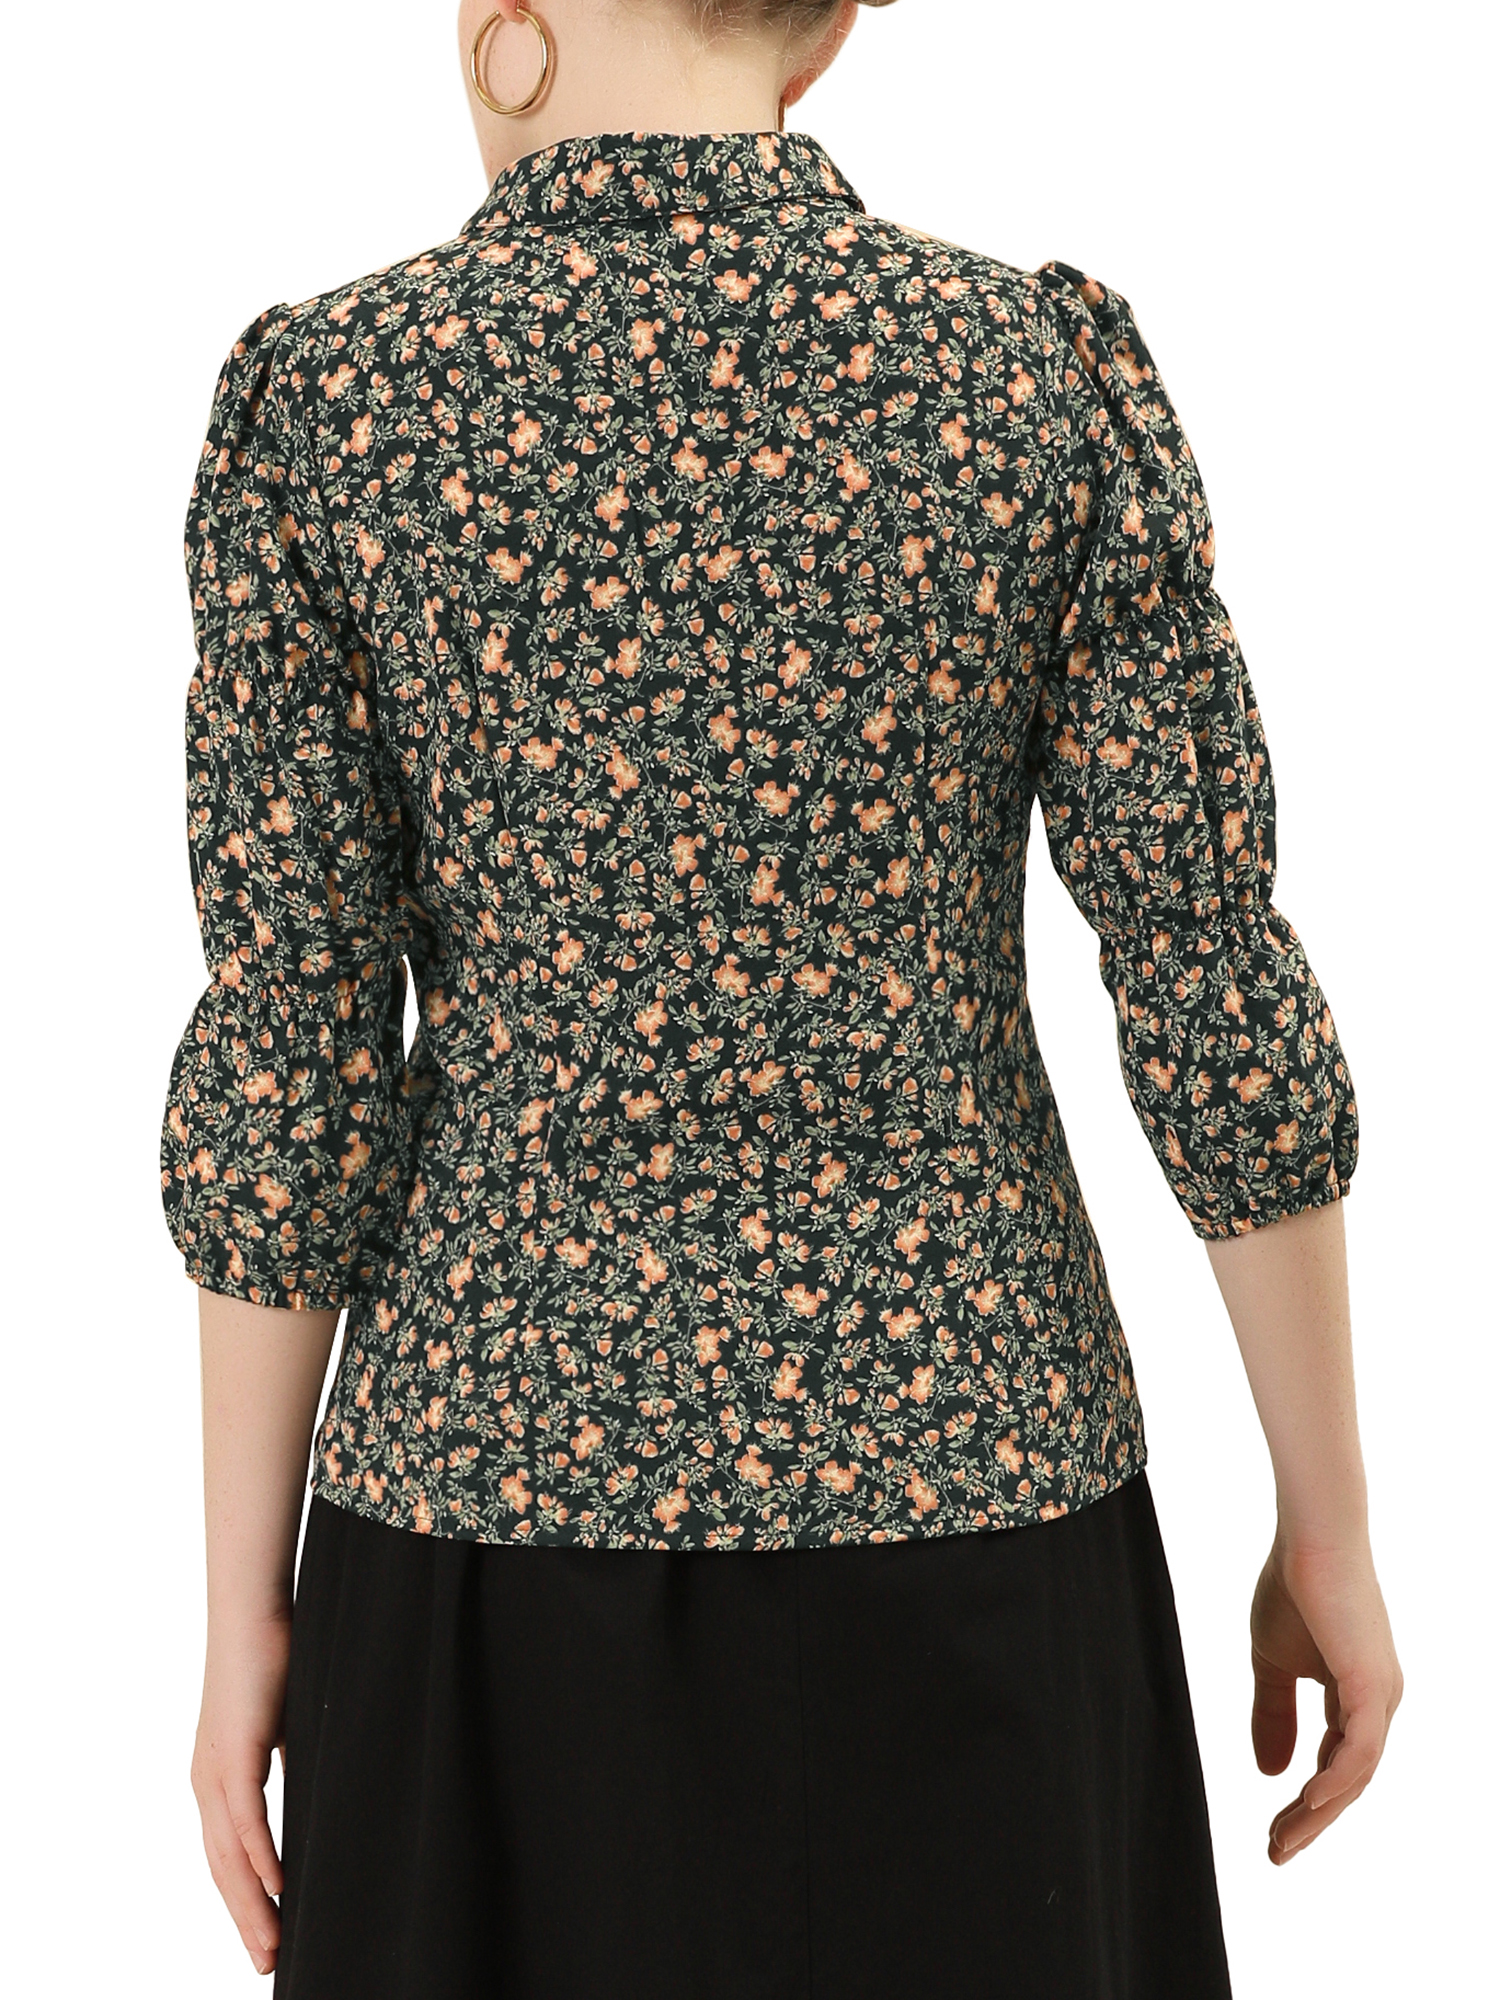 MODA NOVA Junior's Puff 3/4 Sleeves Button Up Peasant Floral Shirts - image 3 of 5